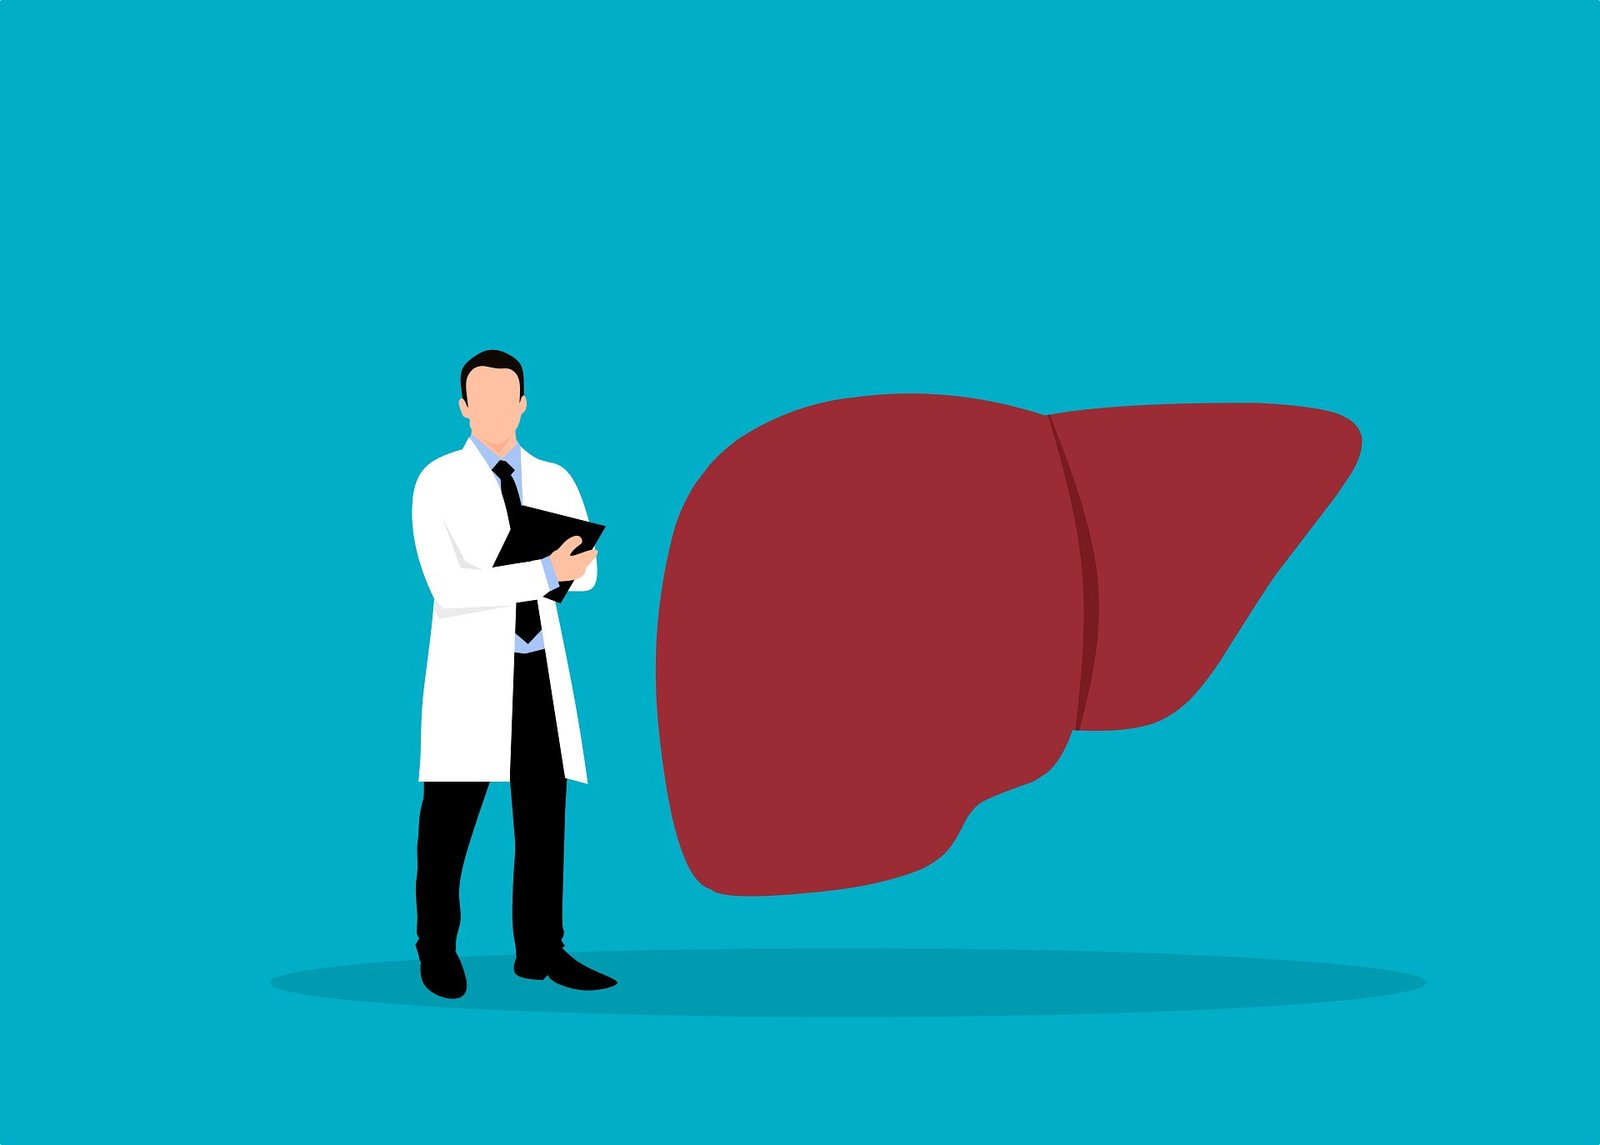 How the dangerous liver disease spreads and how it can be treated